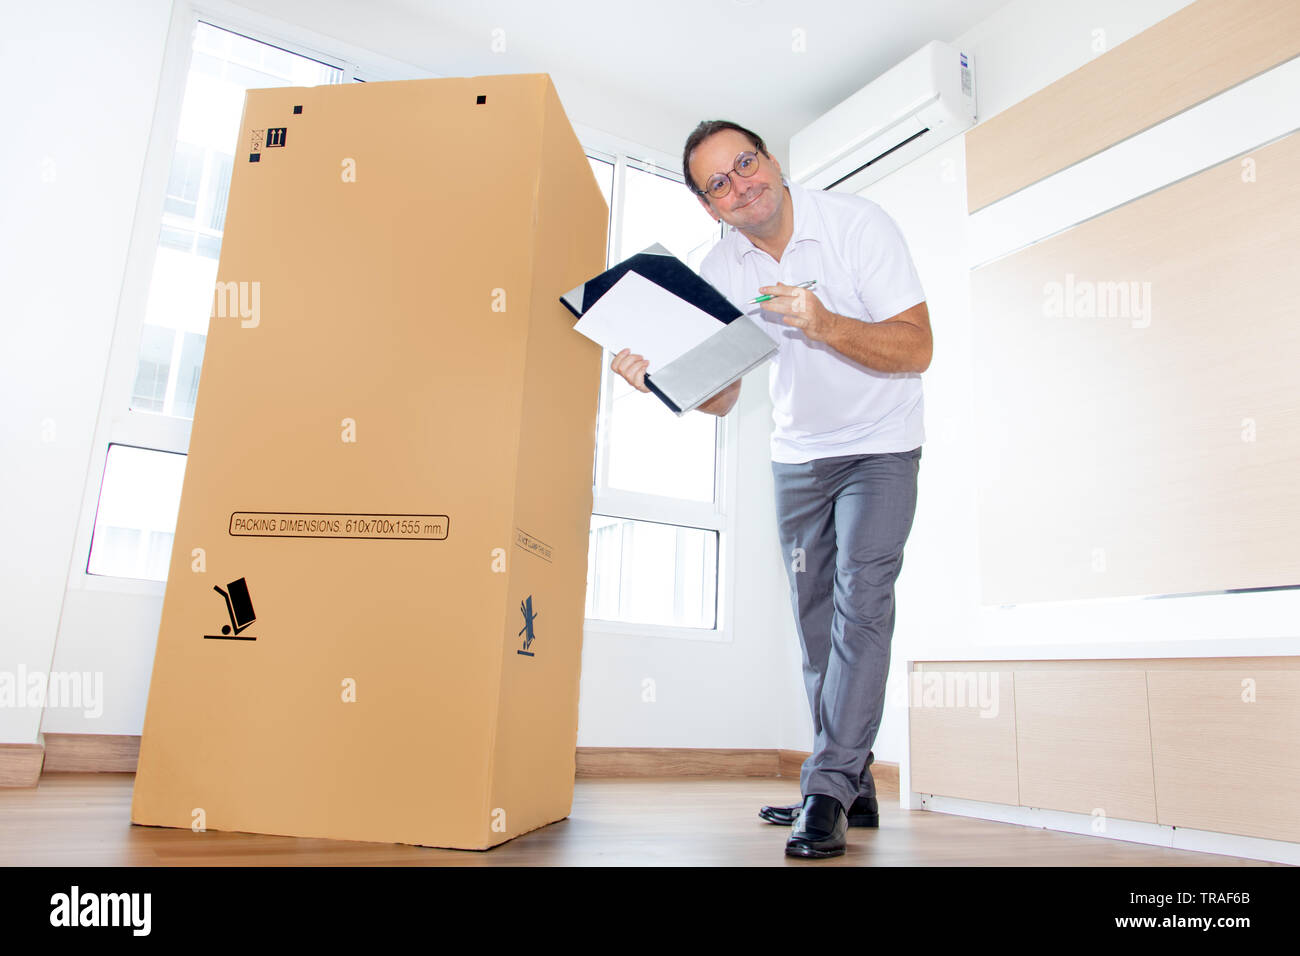 A man in an empty room shows a blank paper document for shipping large package. The postman delivers the parcel to the new apartment. Stock Photo